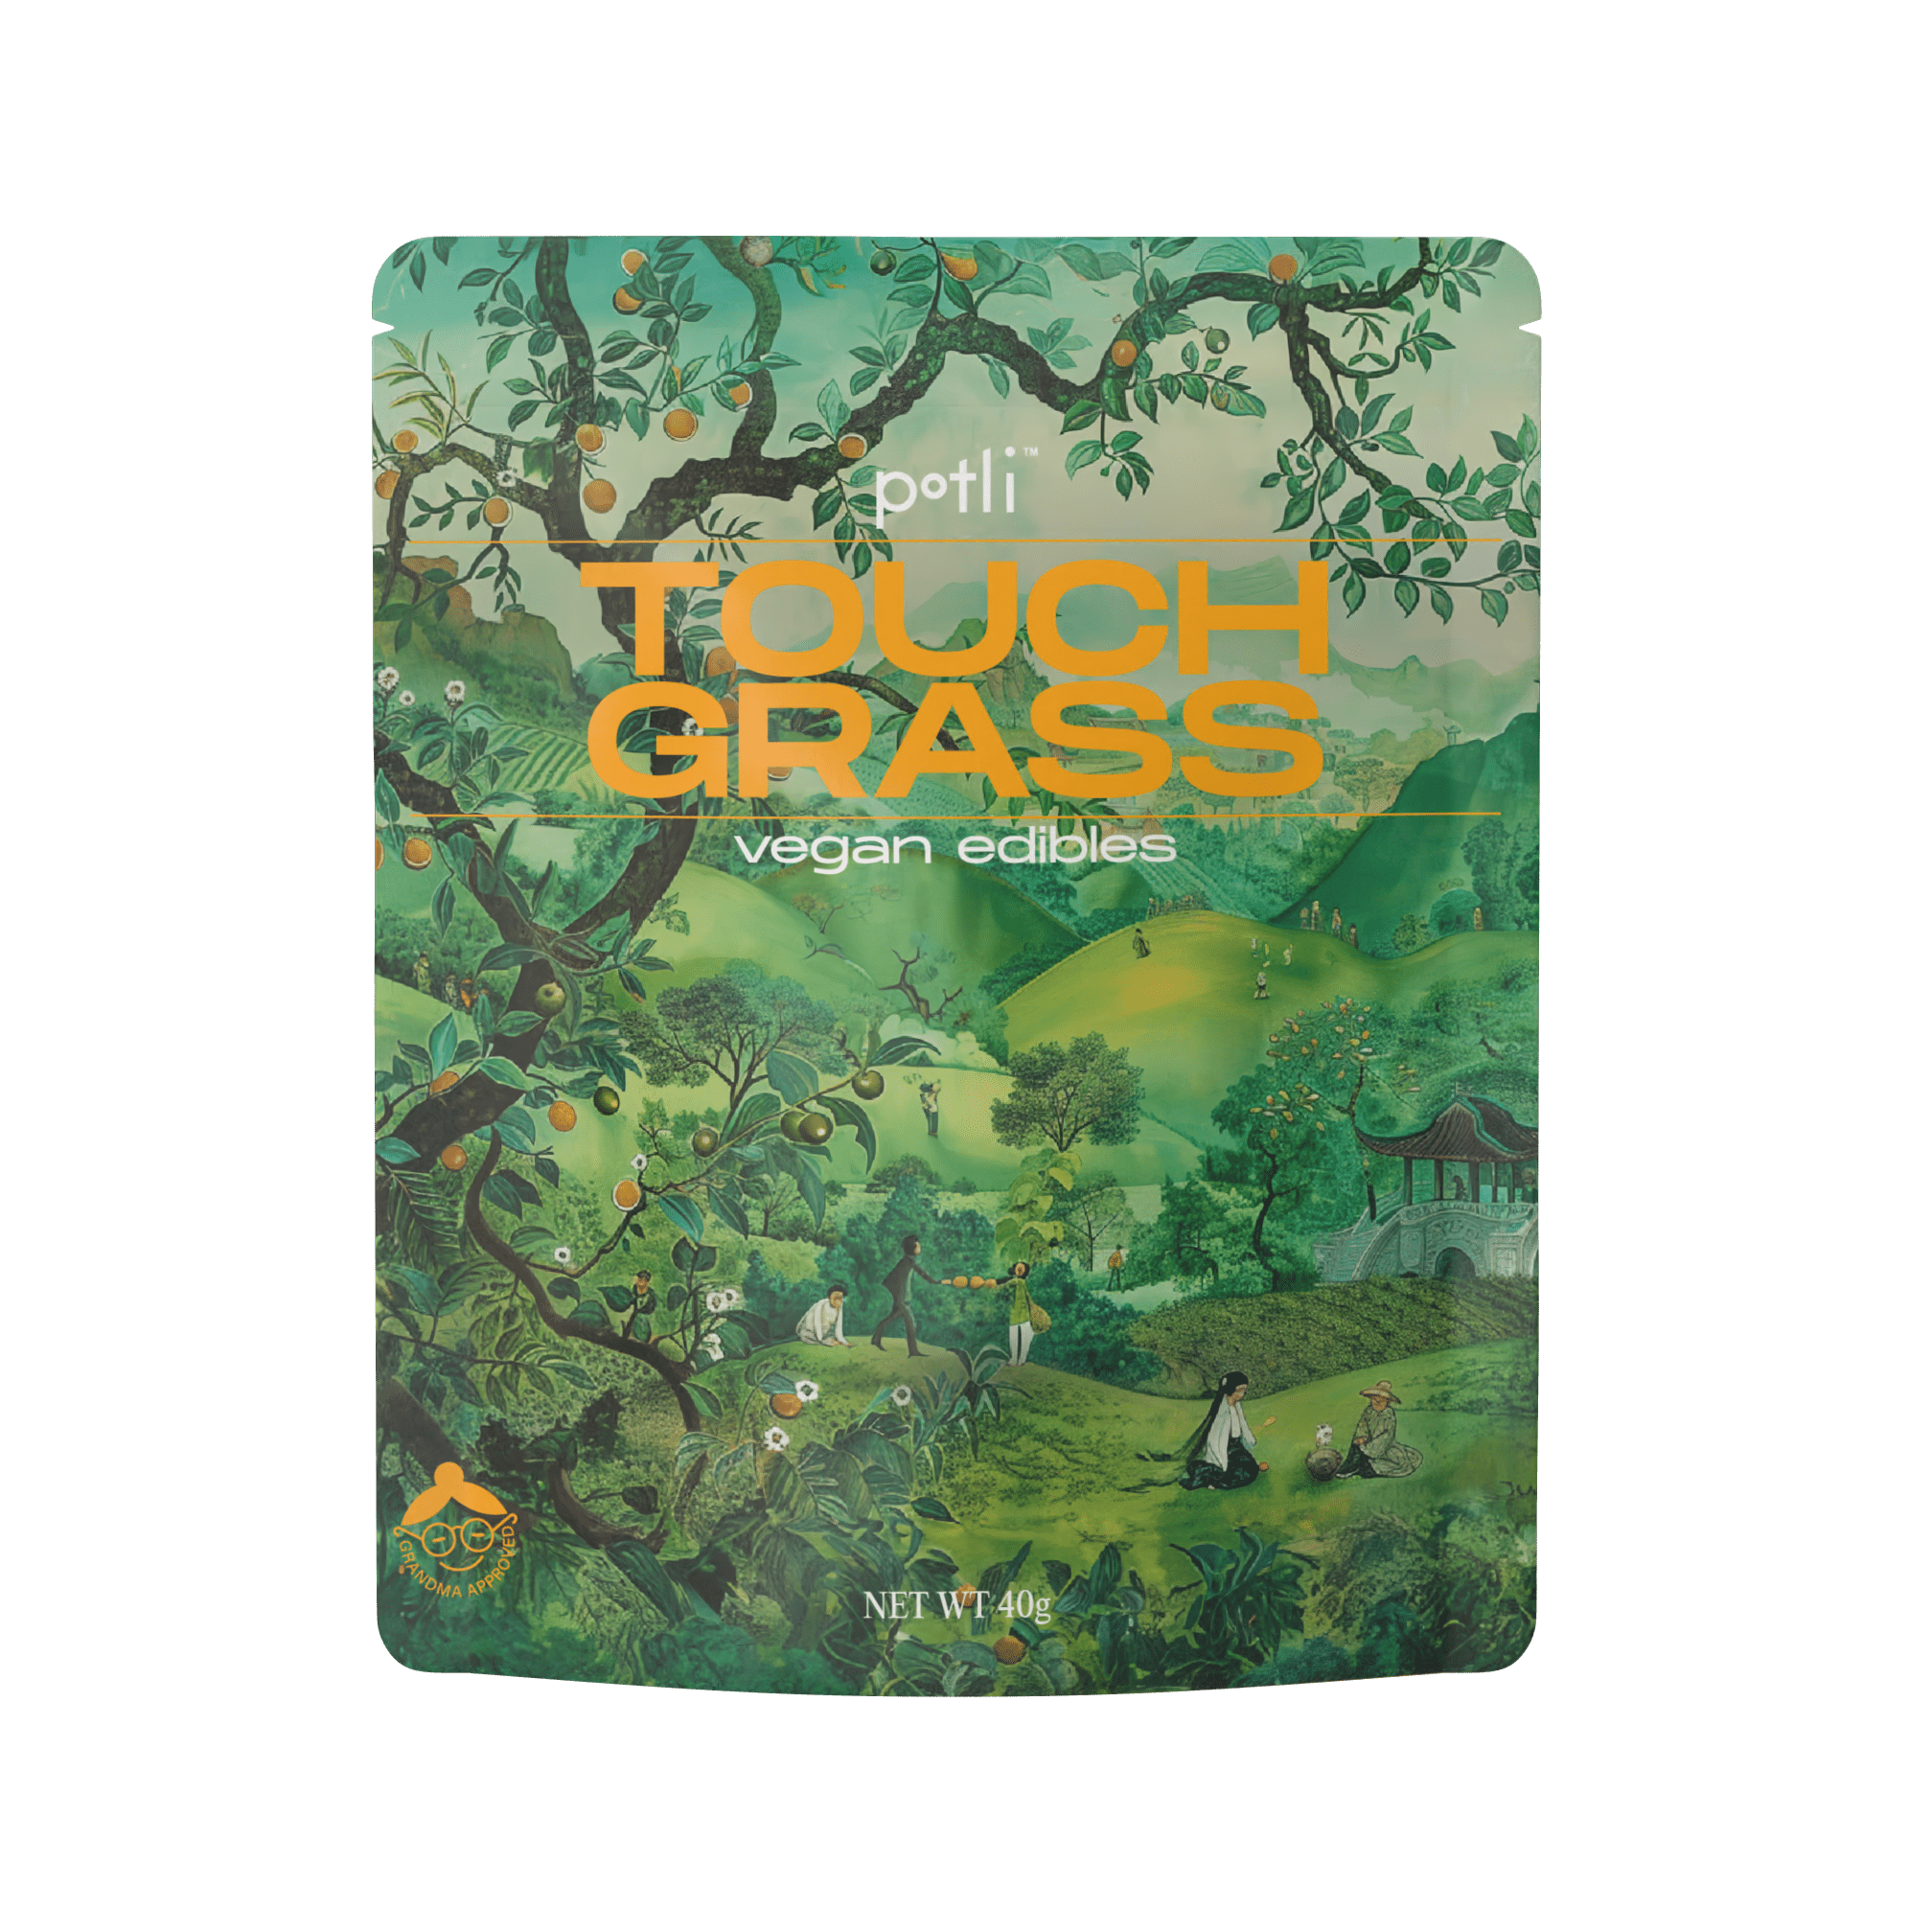 Illustration of a whimsical green landscape on a vegan edible product package, labeled 'TOUCH GRASS'.